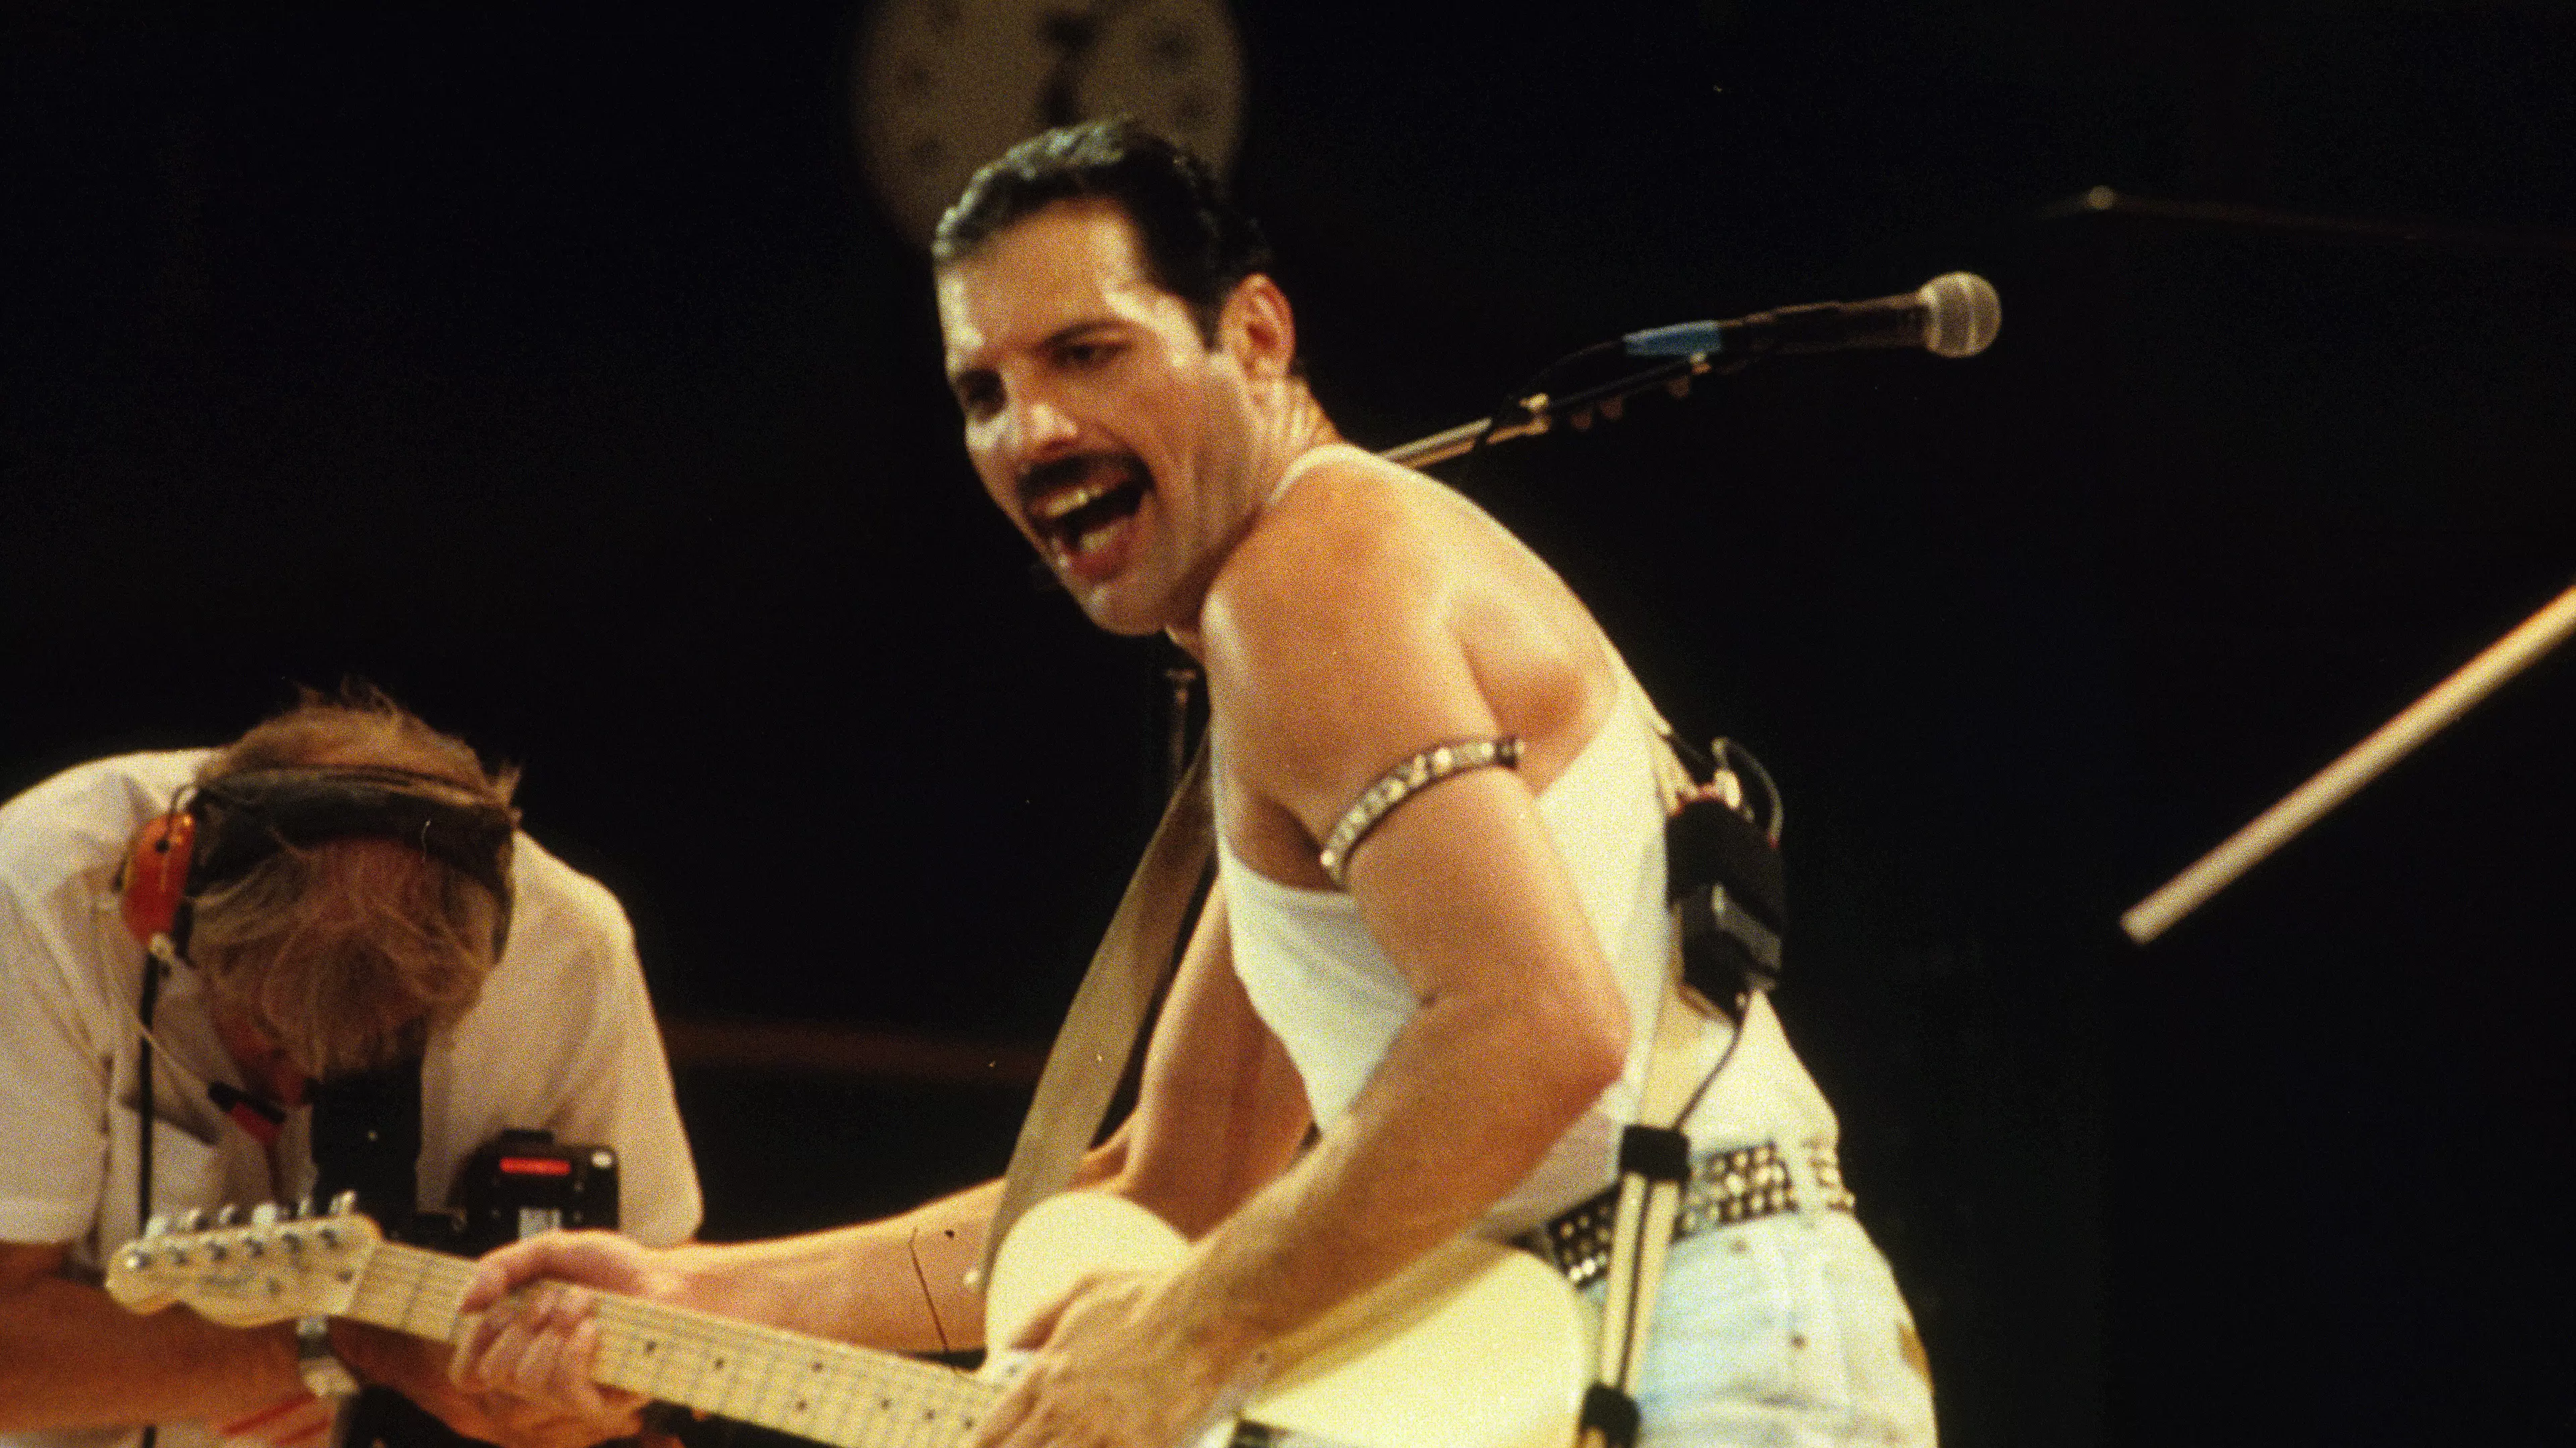 Thirty-Four Years Since Queen's Iconic Live Aid Performance